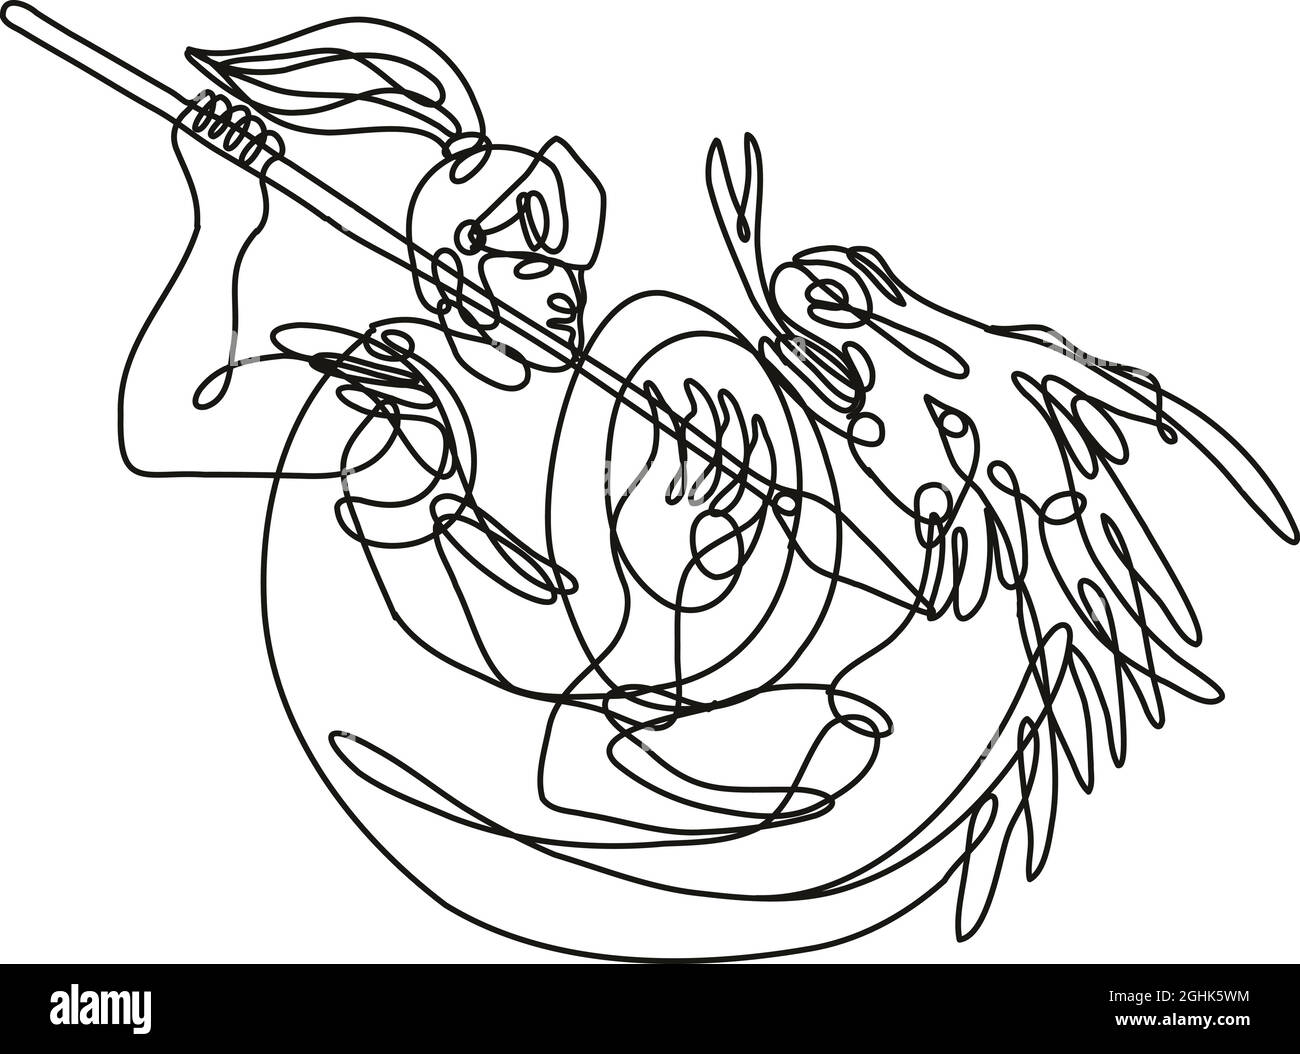 Continuous line drawing illustration of knight with lance and shield fighting dragon done in mono line or doodle style in black and white on isolated Stock Vector